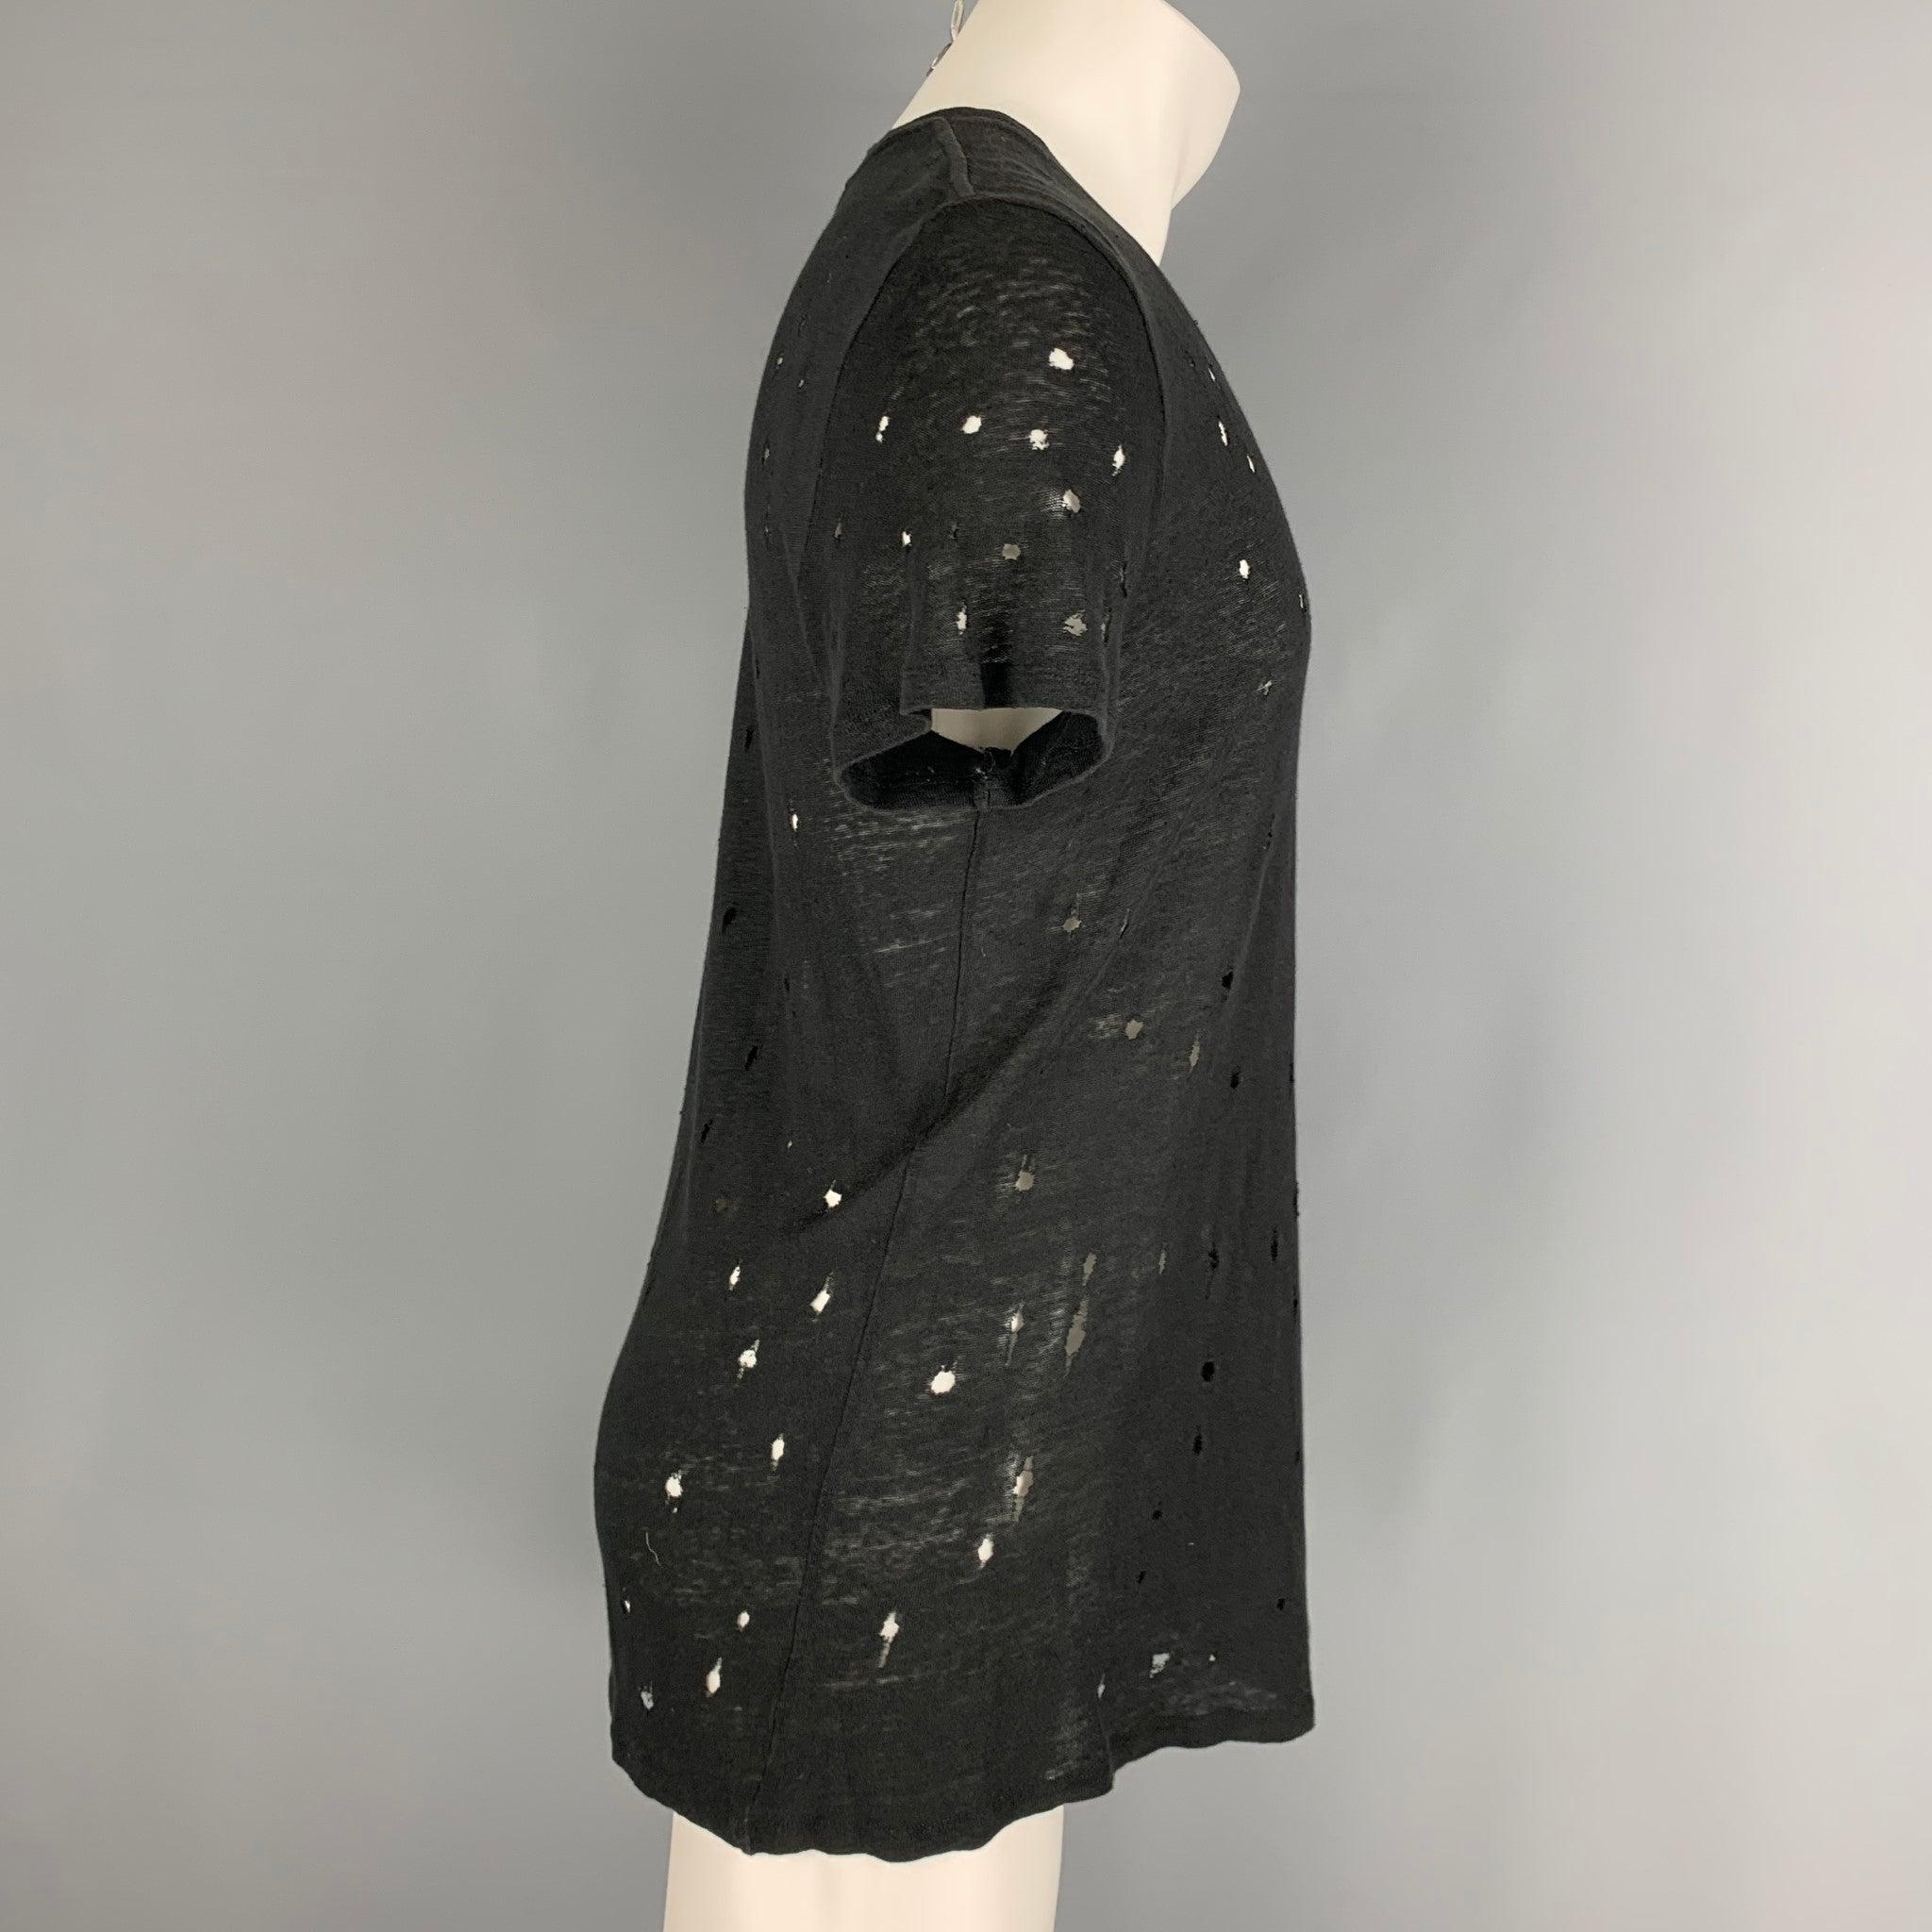 IRO 'Clay' t-shirt comes in a black linen featuring distressed details throughout and a crew-neck. Made in Portugal.Very Good Pre-Owned Condition. 

Marked:   S 

Measurements: 
 
Shoulder: 18 inches Chest: 46 inches Sleeve: 8 inches Length: 26.5